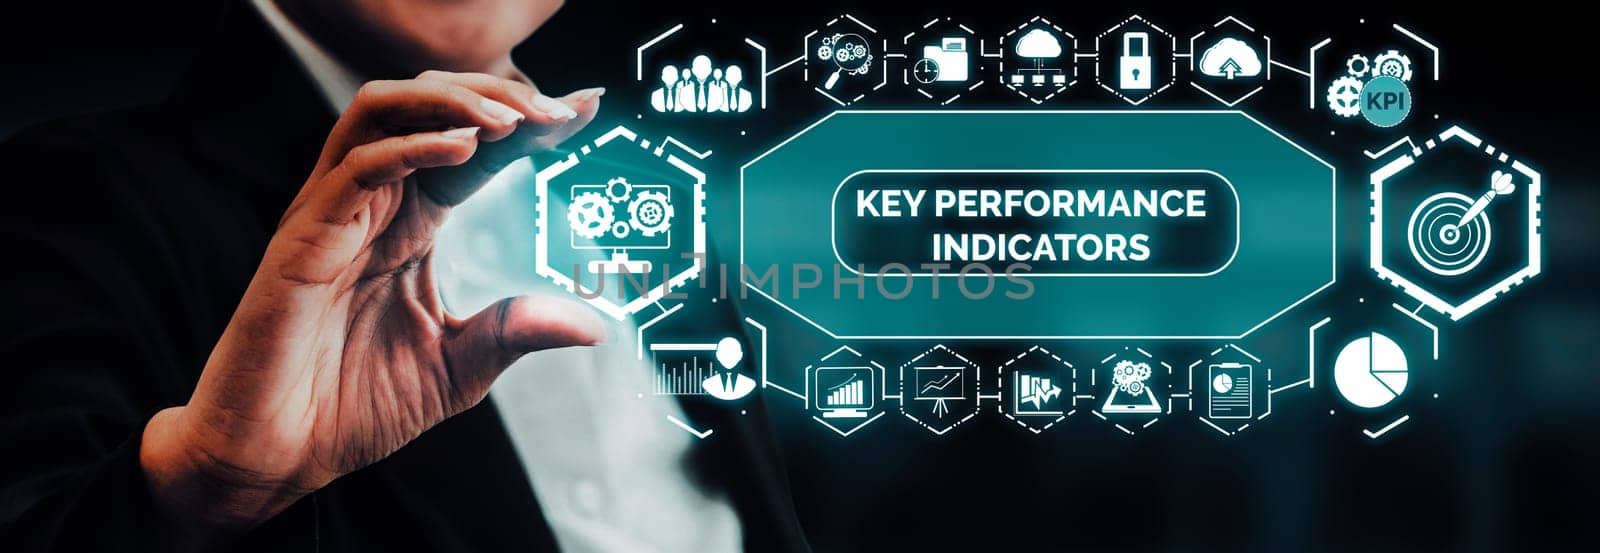 KPI Key Performance Indicator for Business Concept - Modern graphic interface showing symbols of job target evaluation and analytical numbers for marketing KPI management. uds